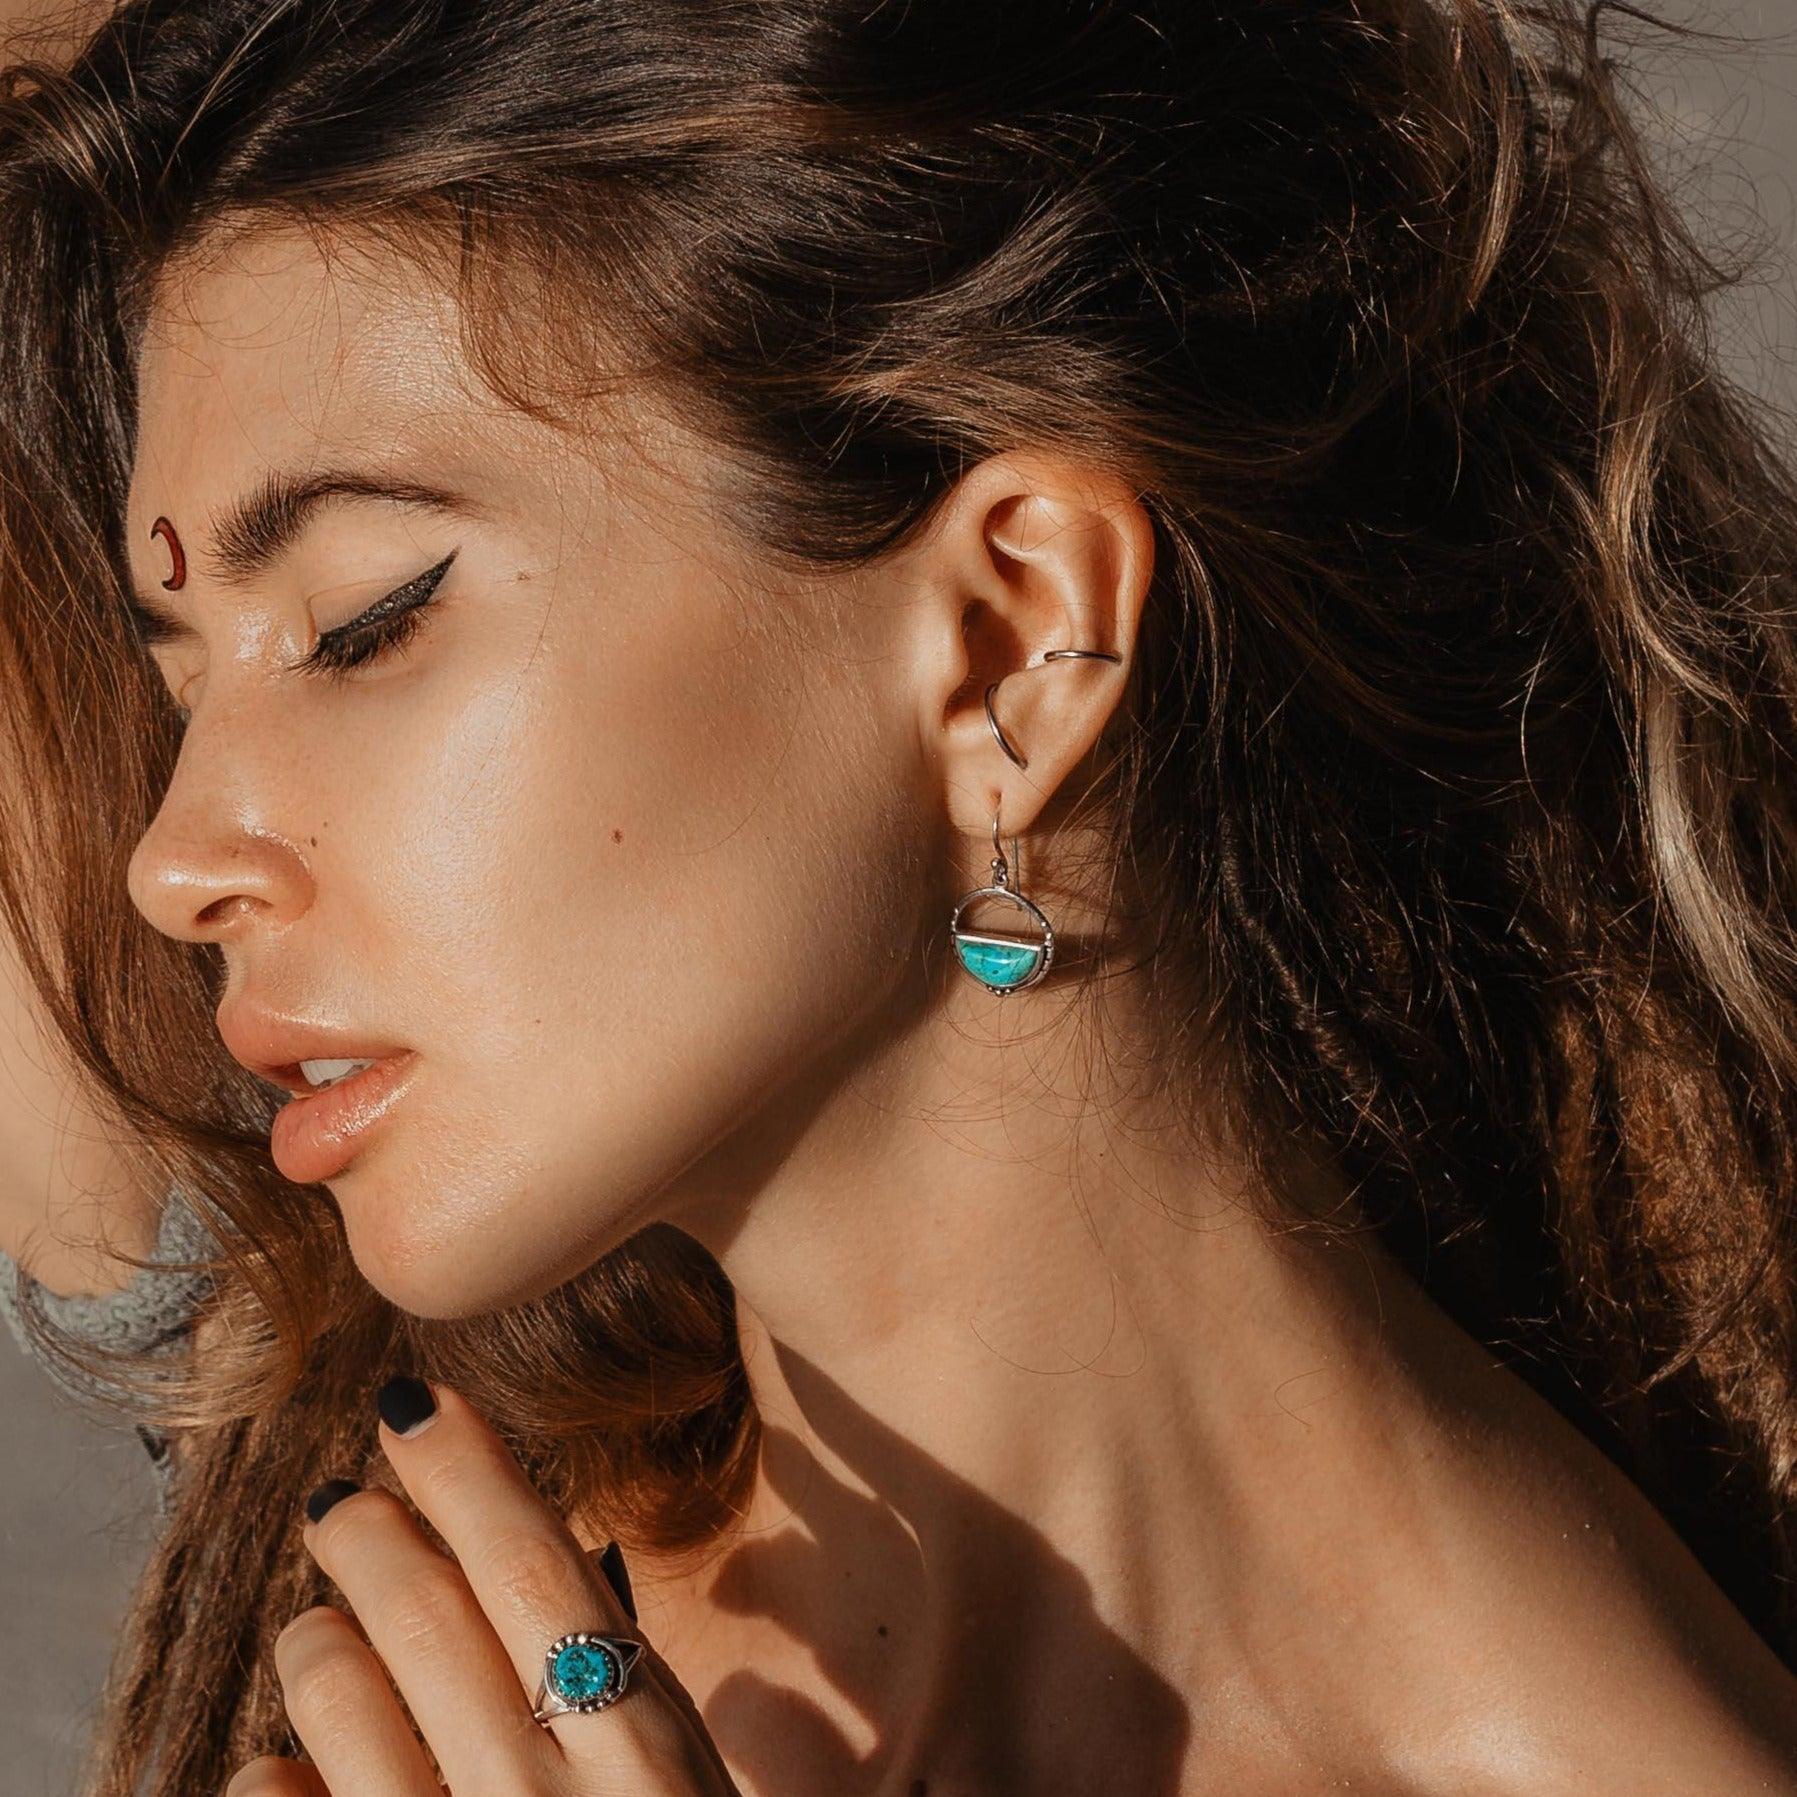 Horizon Turquoise Earrings - womens jewellery by indie and harper